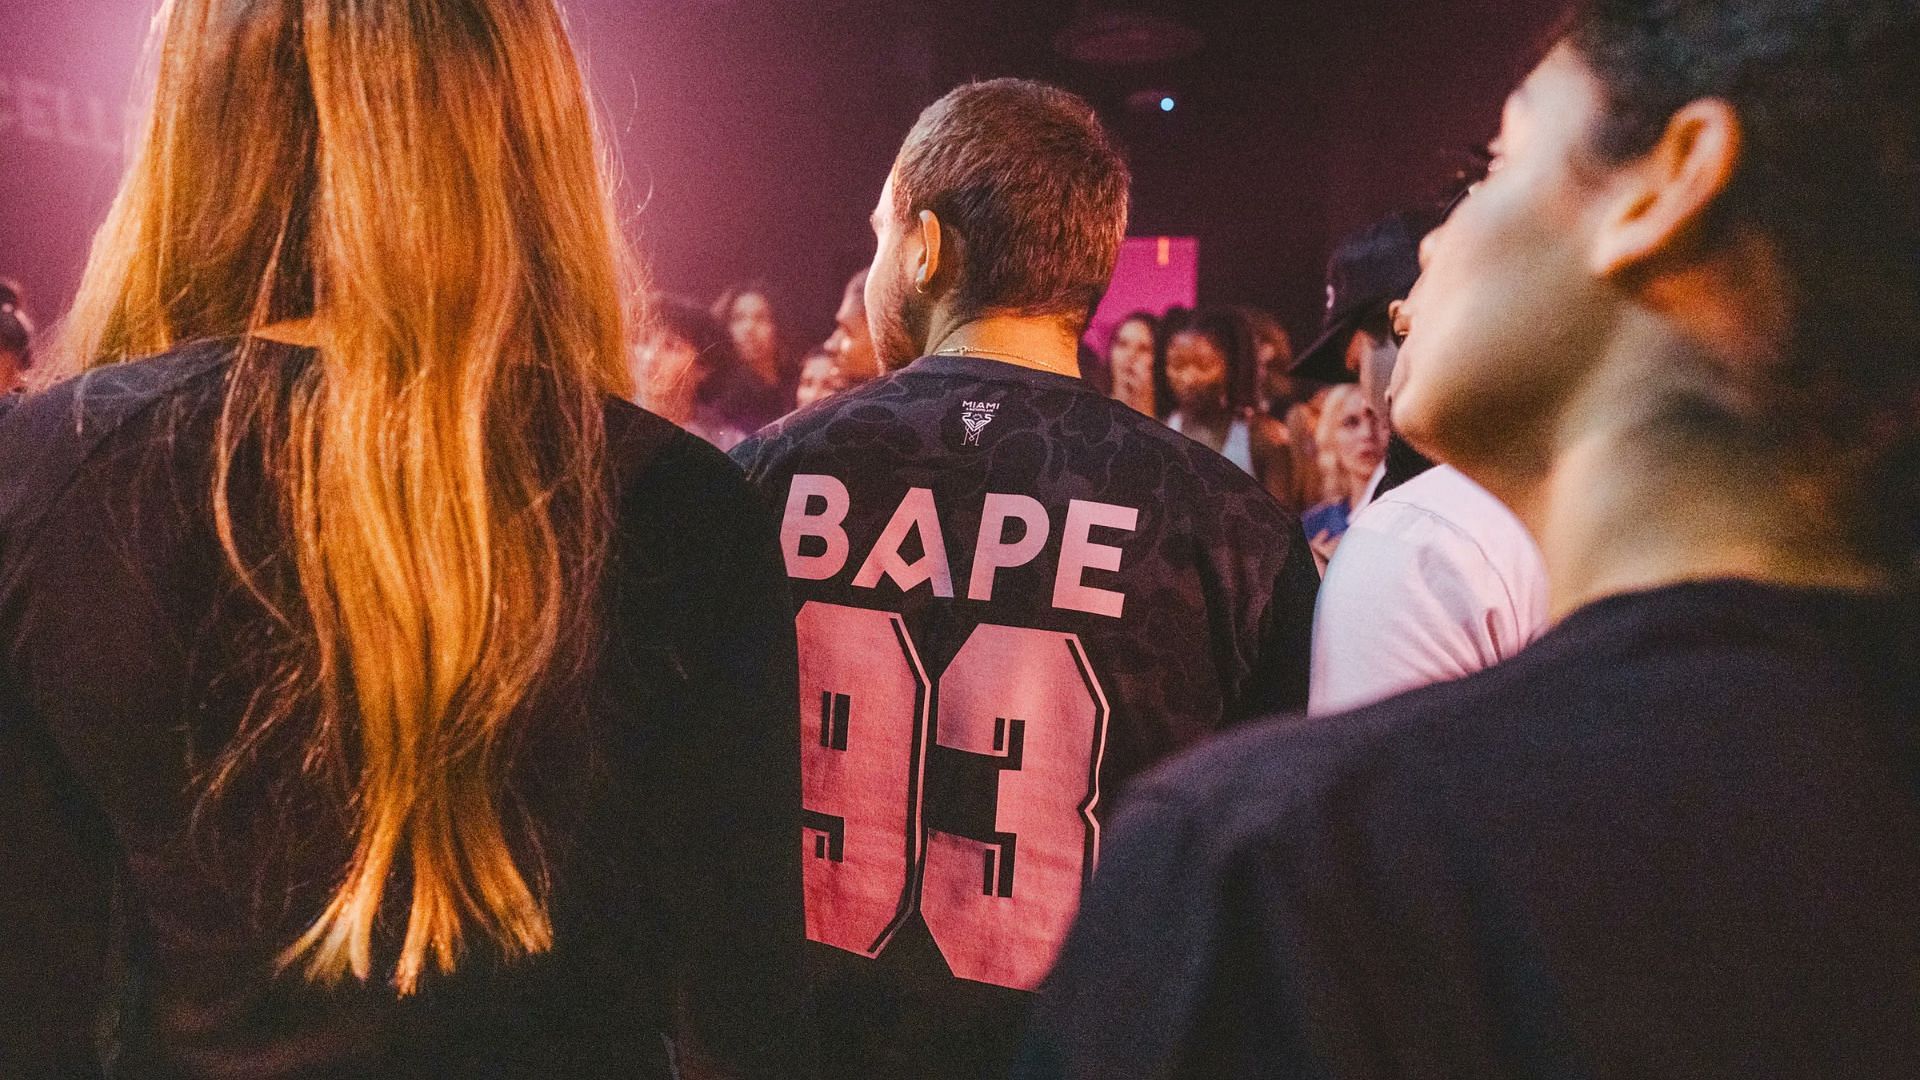 BAPE: Inter Miami CF x BAPE collection: Where to get, price, and